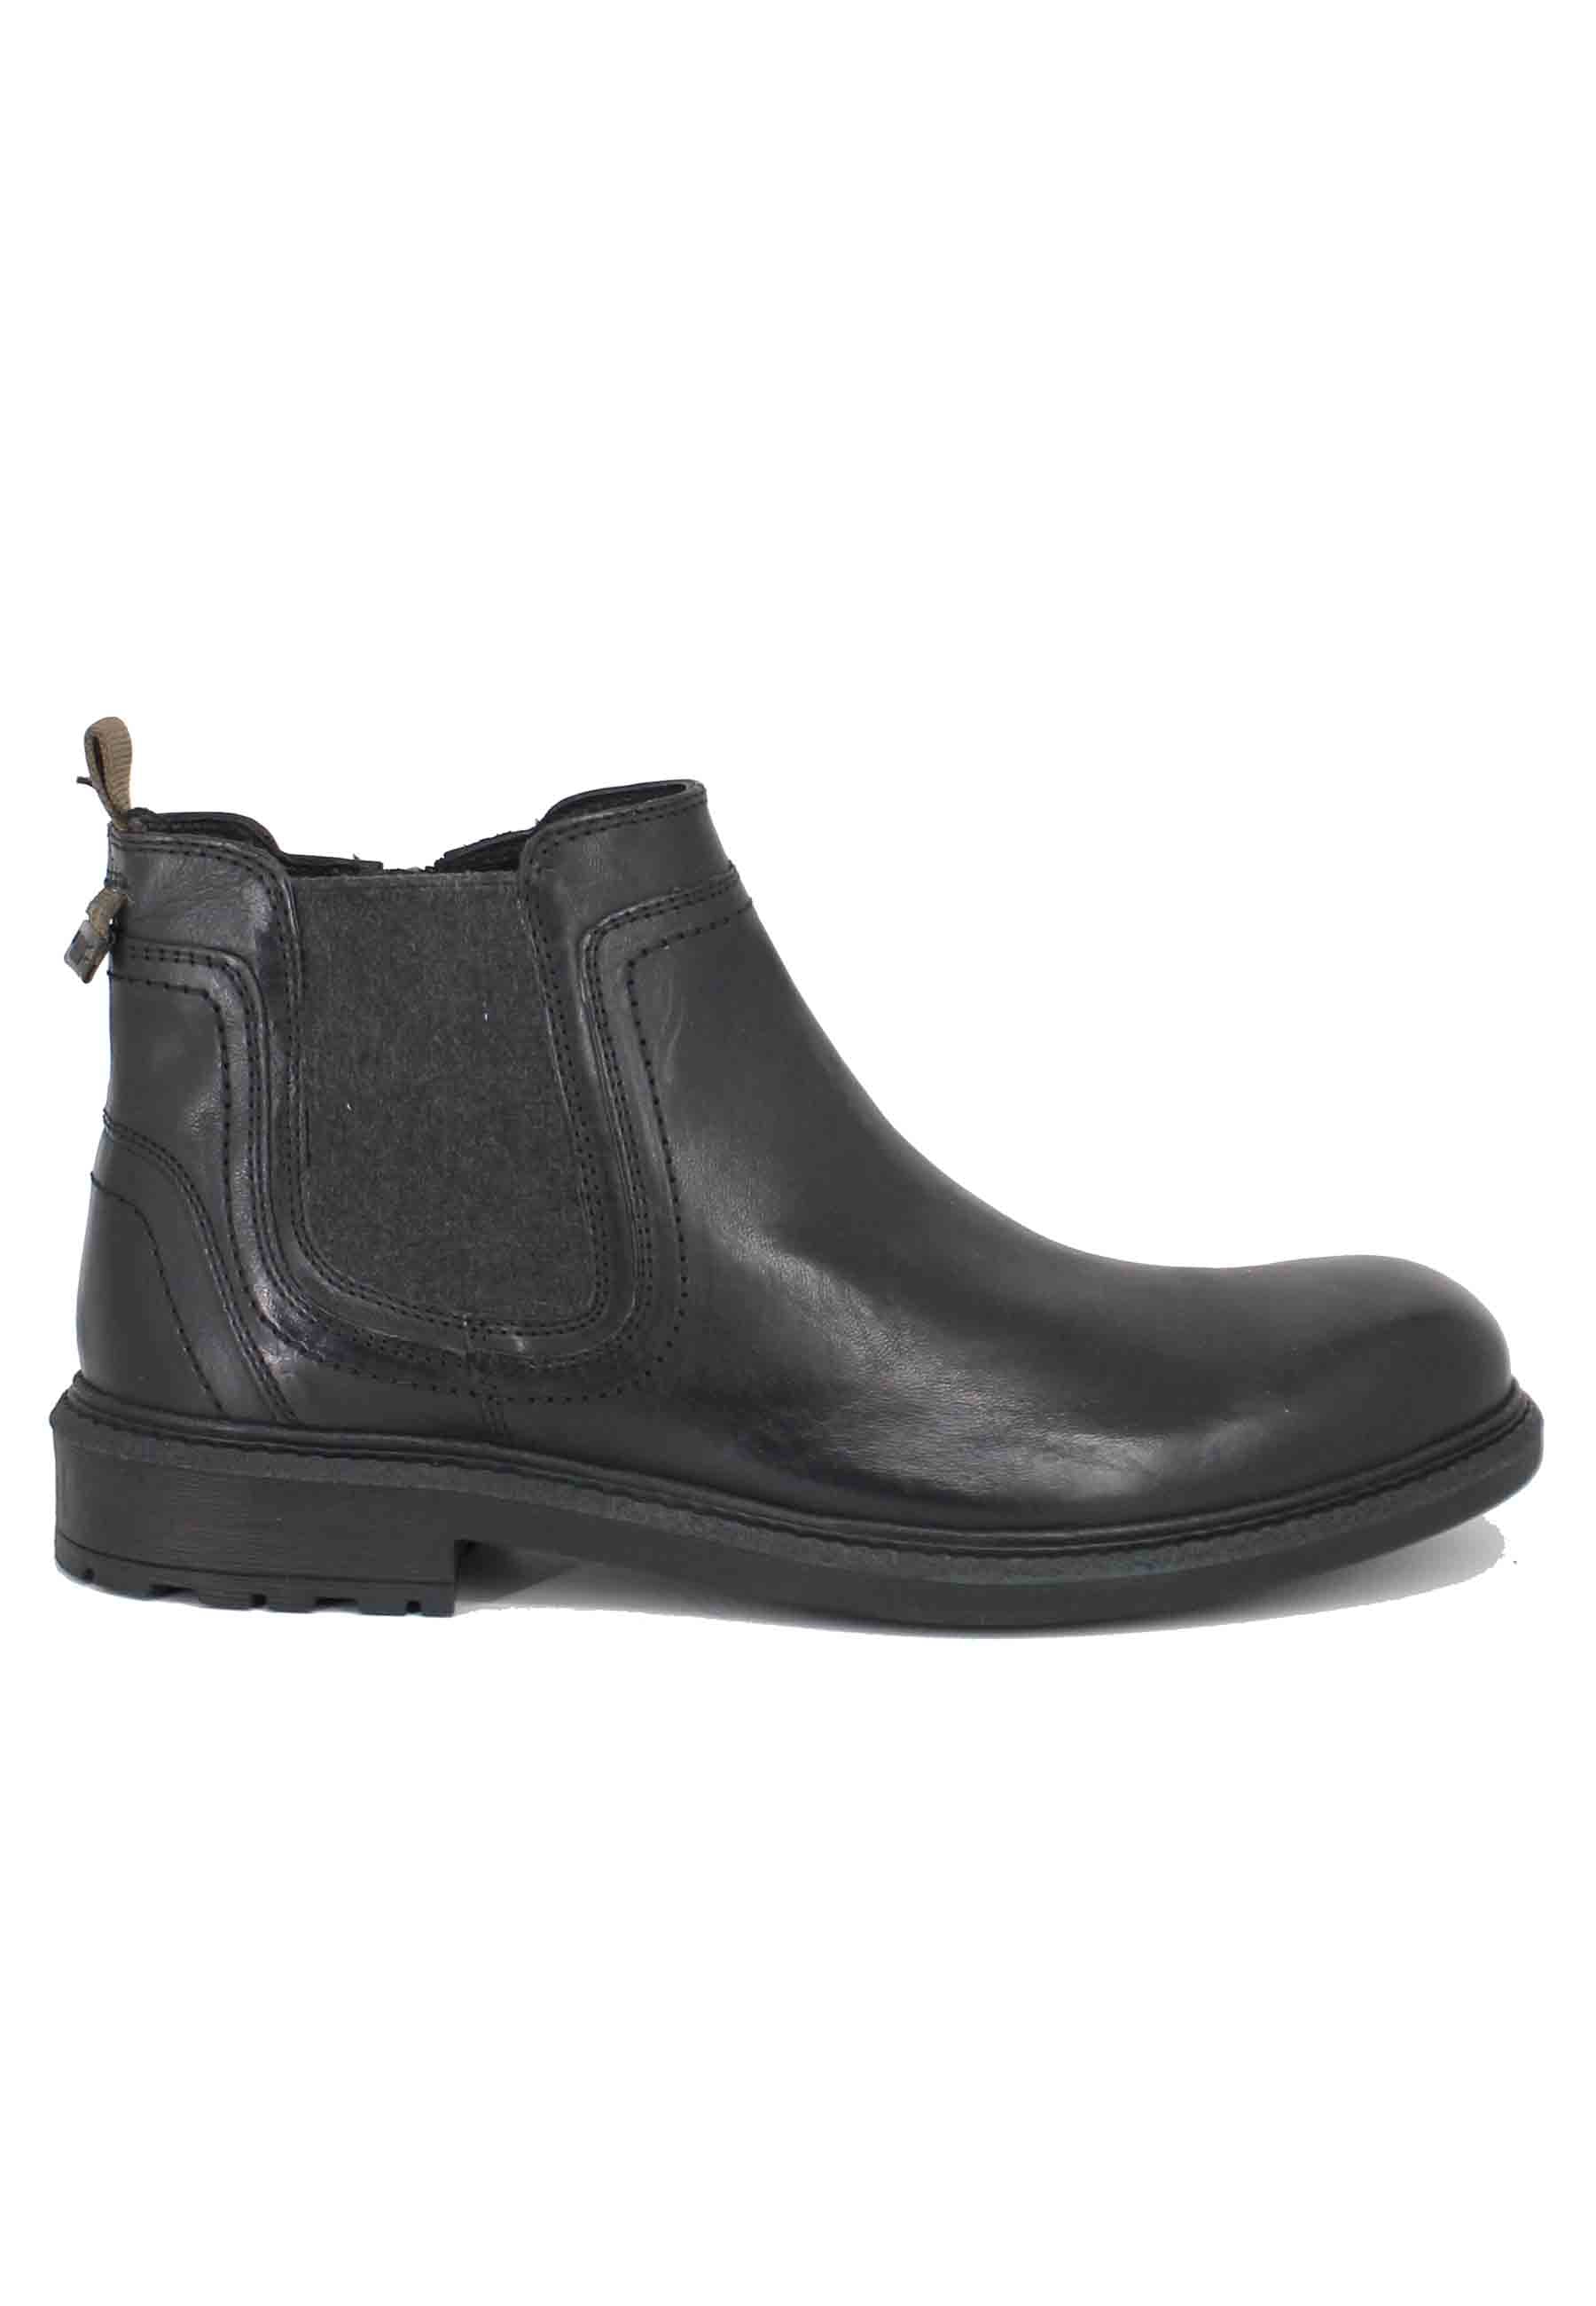 Men's ankle boots in black leather with side zip and Mywood Chelsea rubber sole